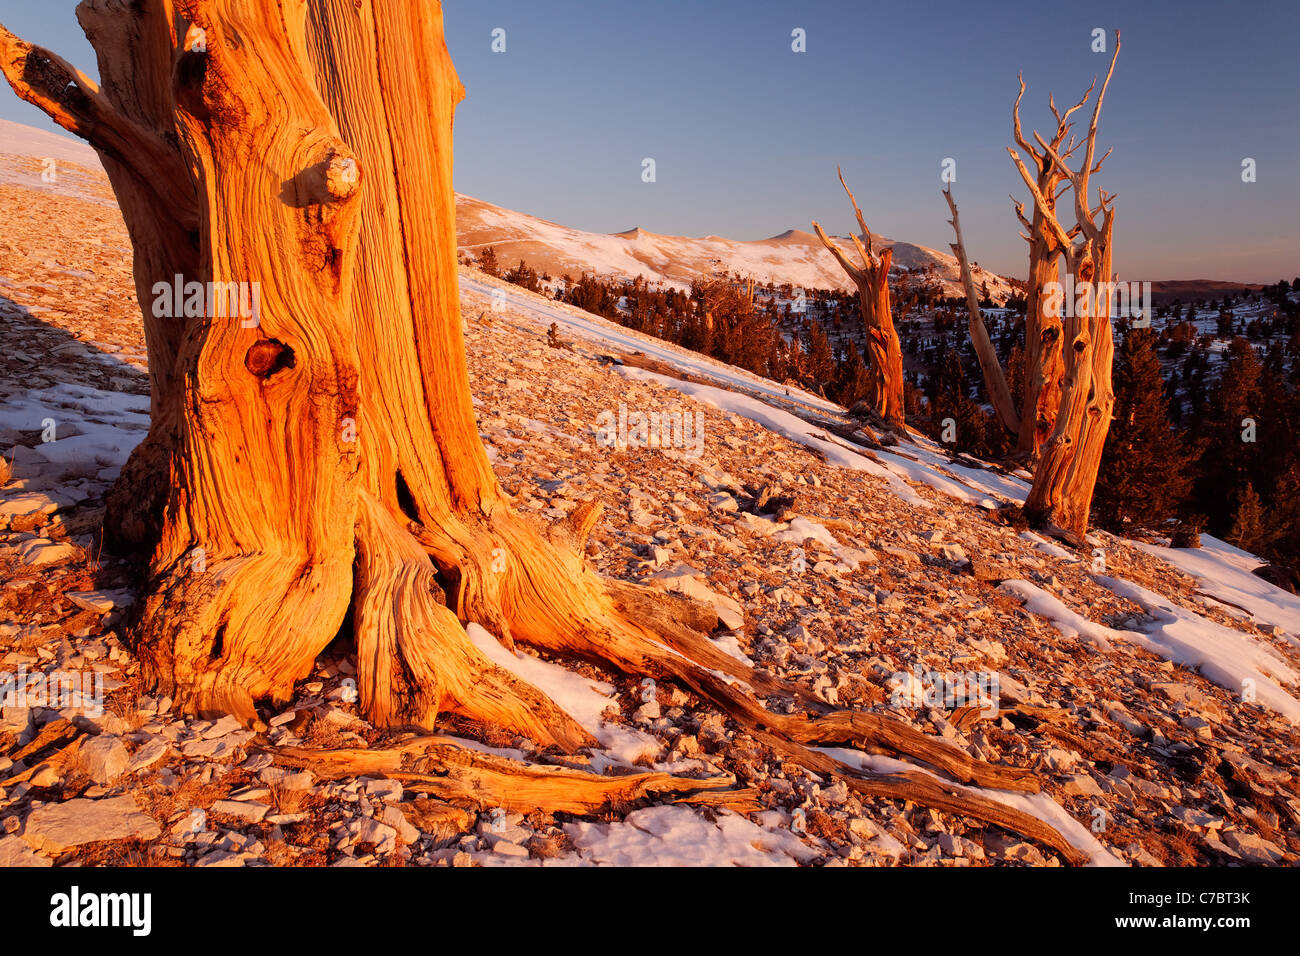 Bristlecone pines and White Mountains at sunrise, Inyo National Forest, White Mountains, California, USA Stock Photo